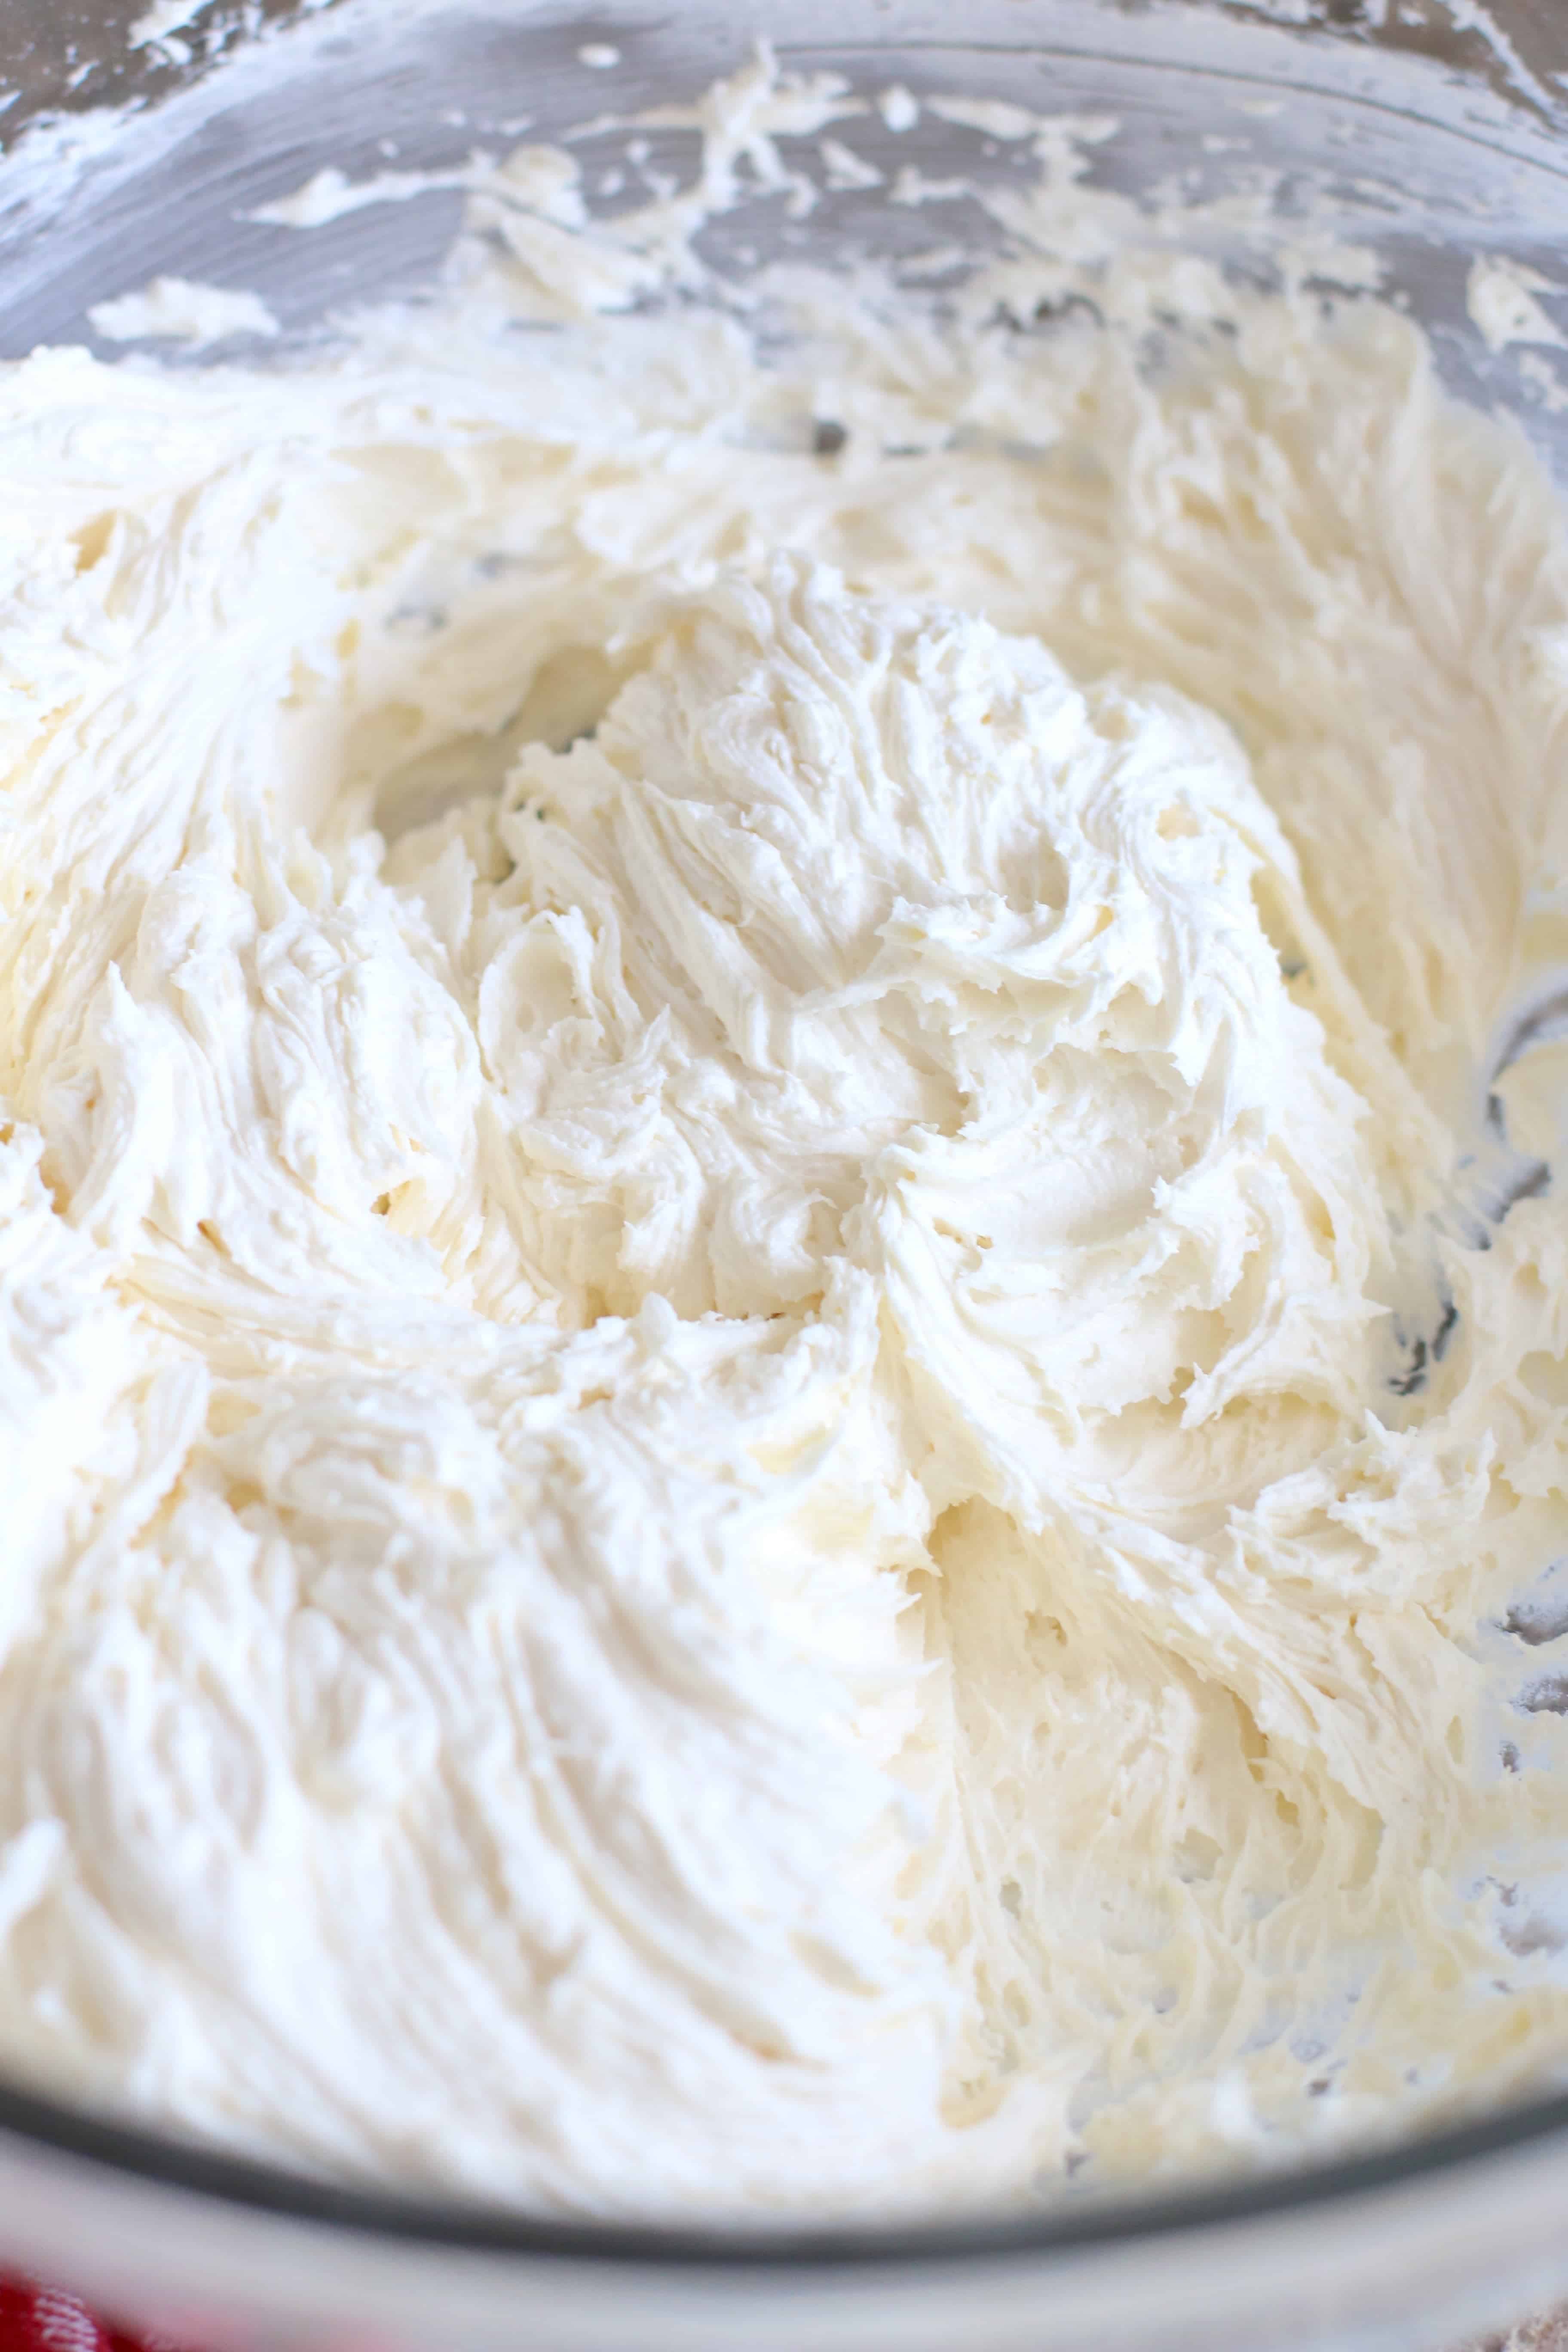 marshmallow fluff frosting whipped together in a mixing bowl.